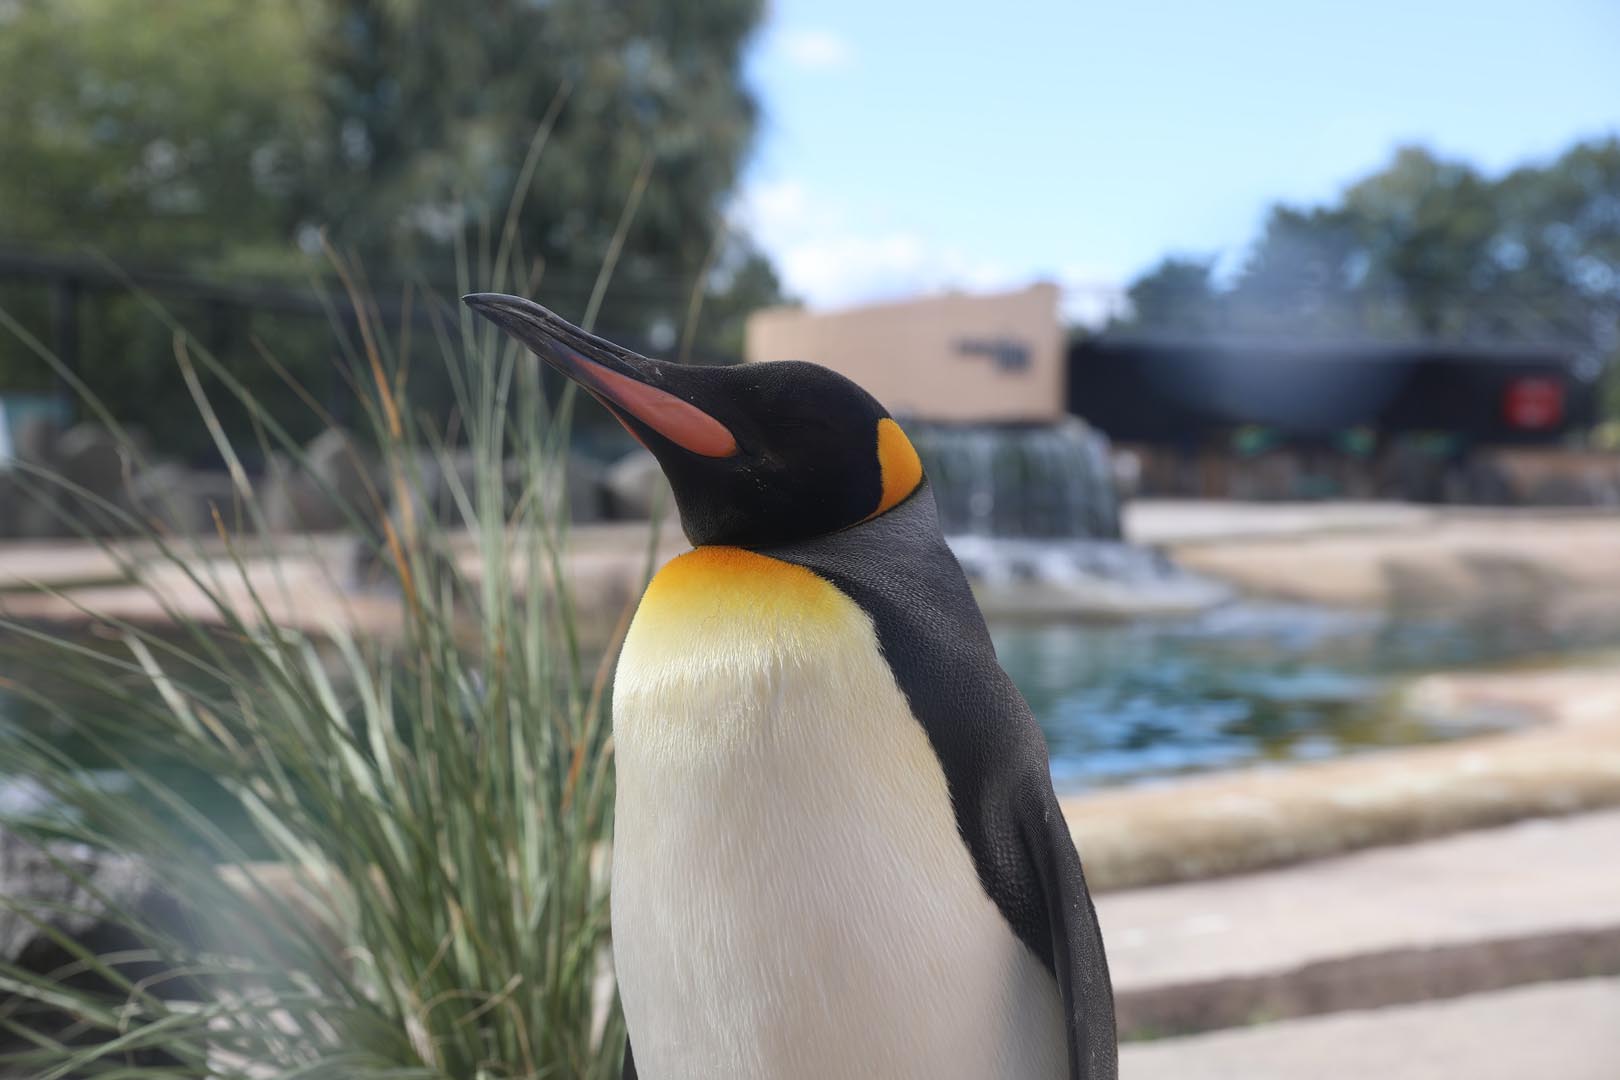 King penguin Sir Nils Olav standing in front of penguin pool next to plant facing left